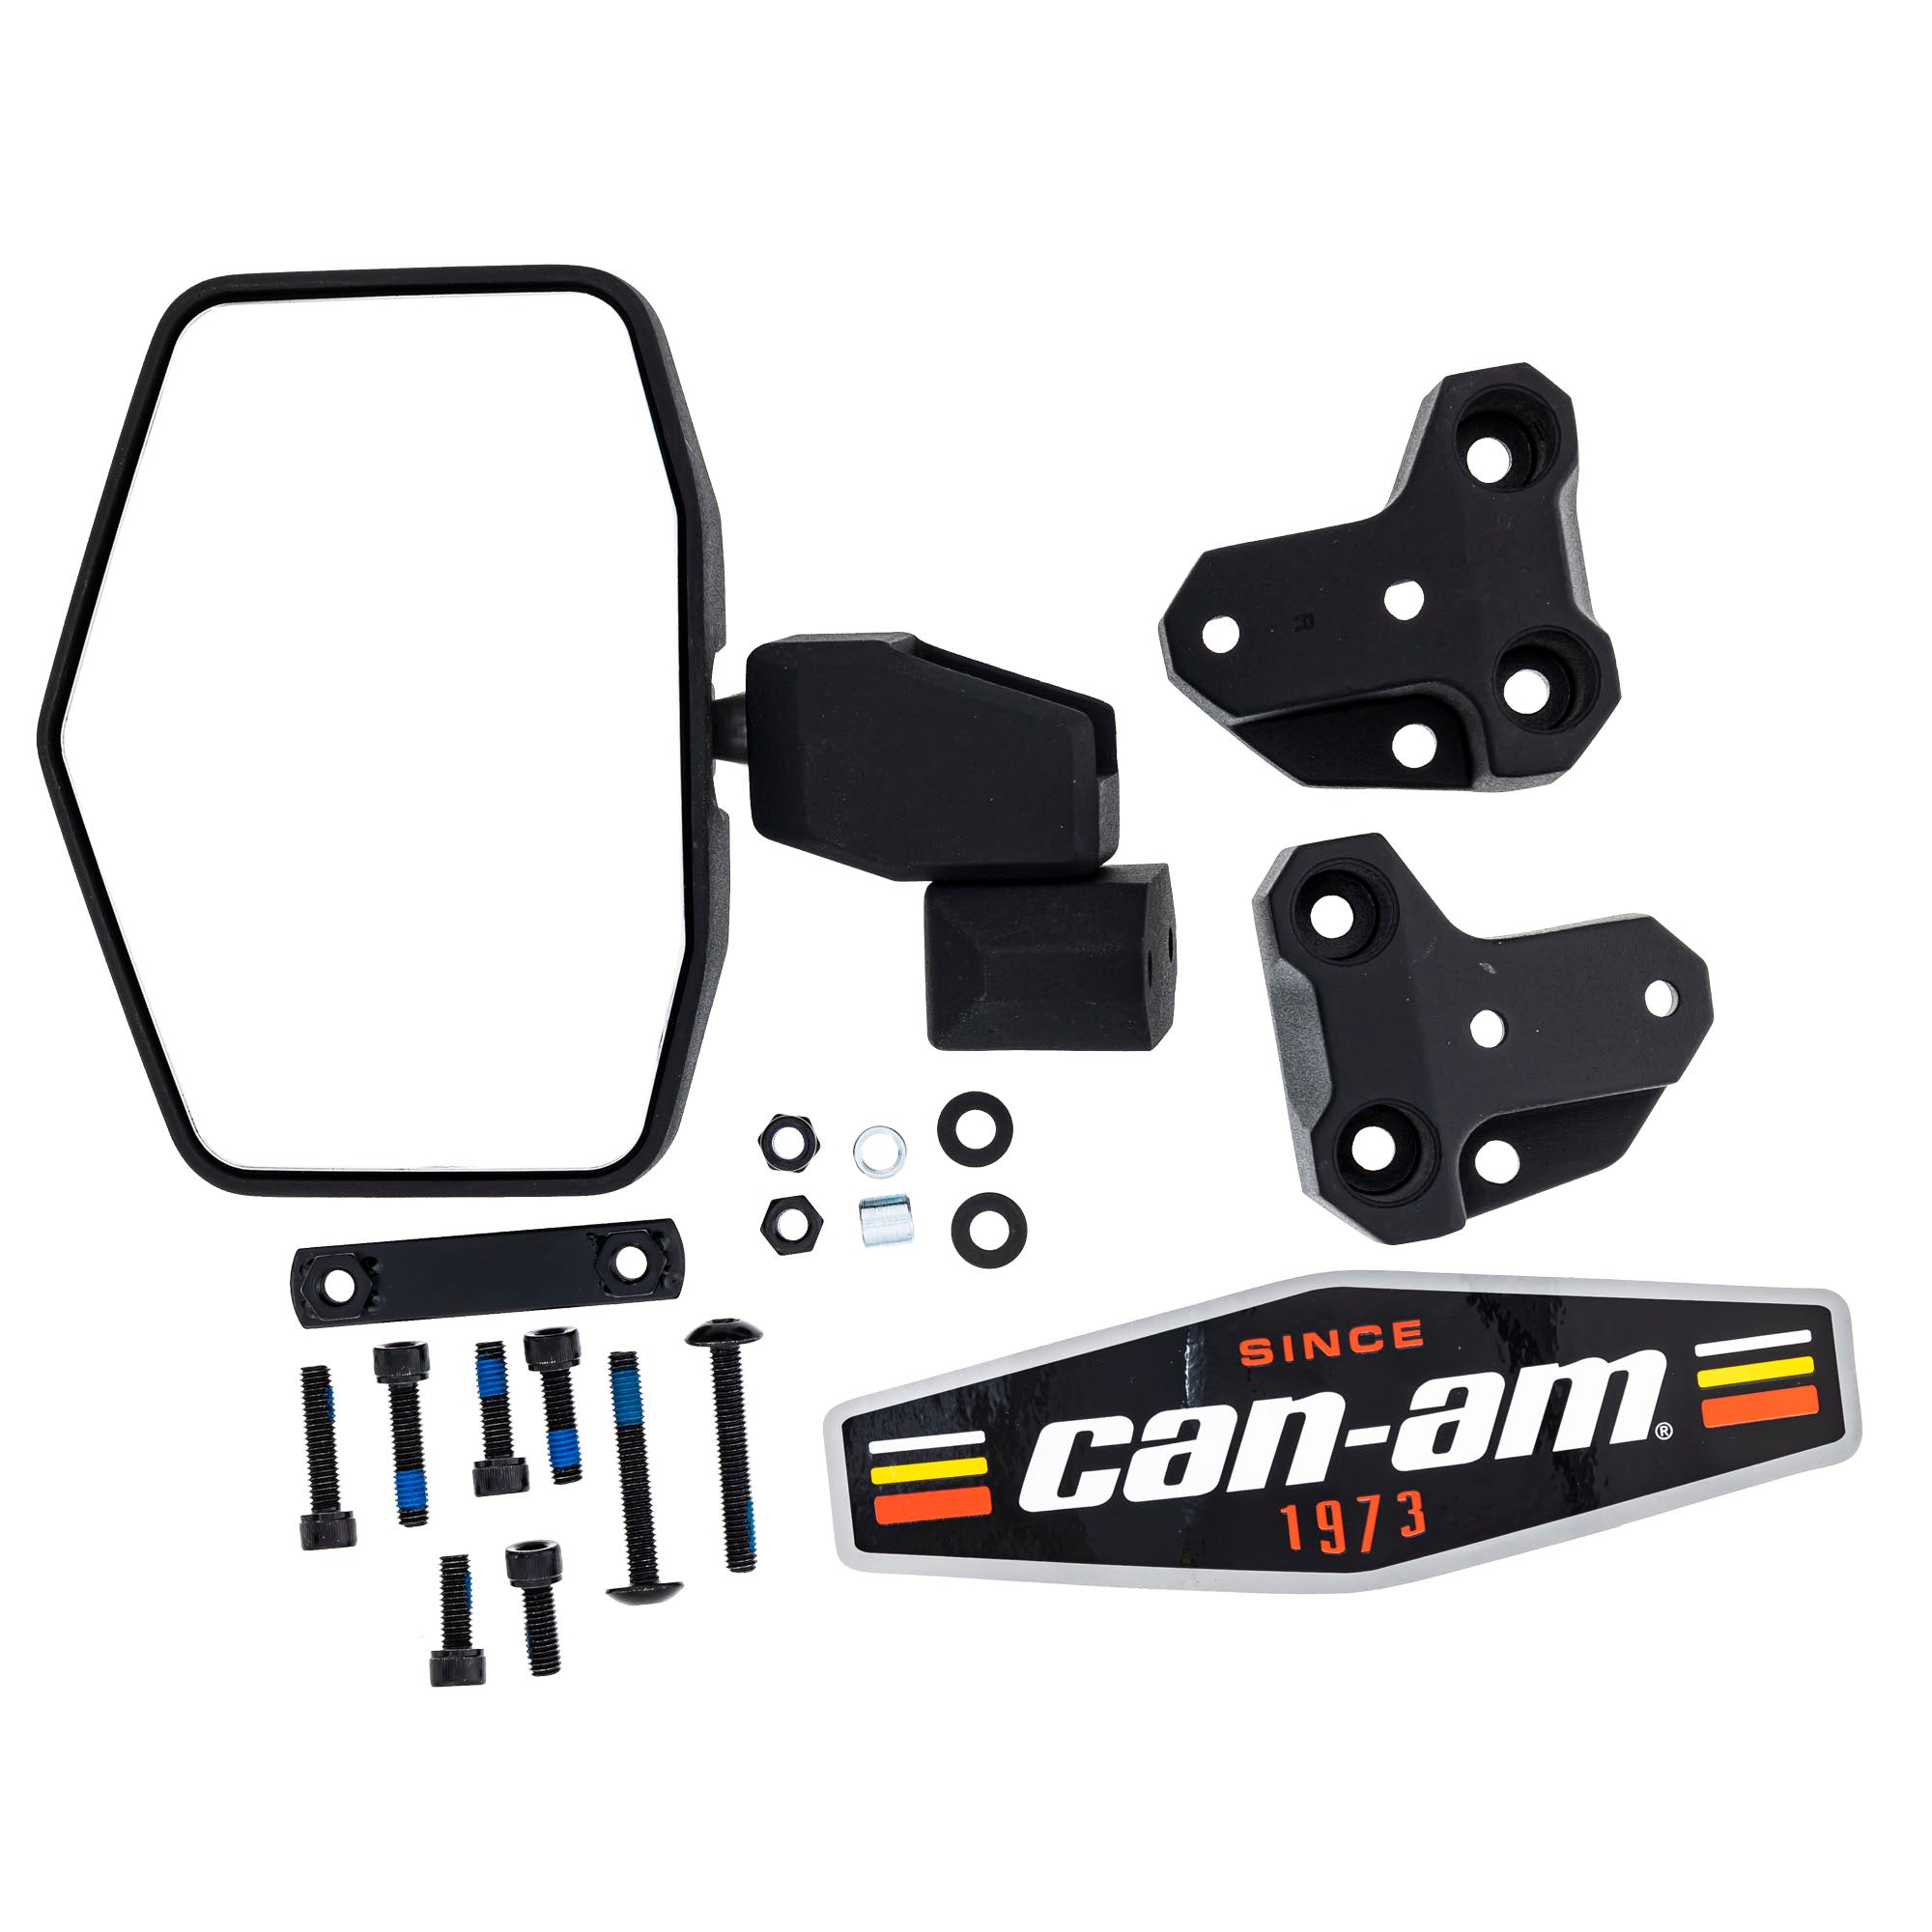 Can-Am 715008101 Mirror